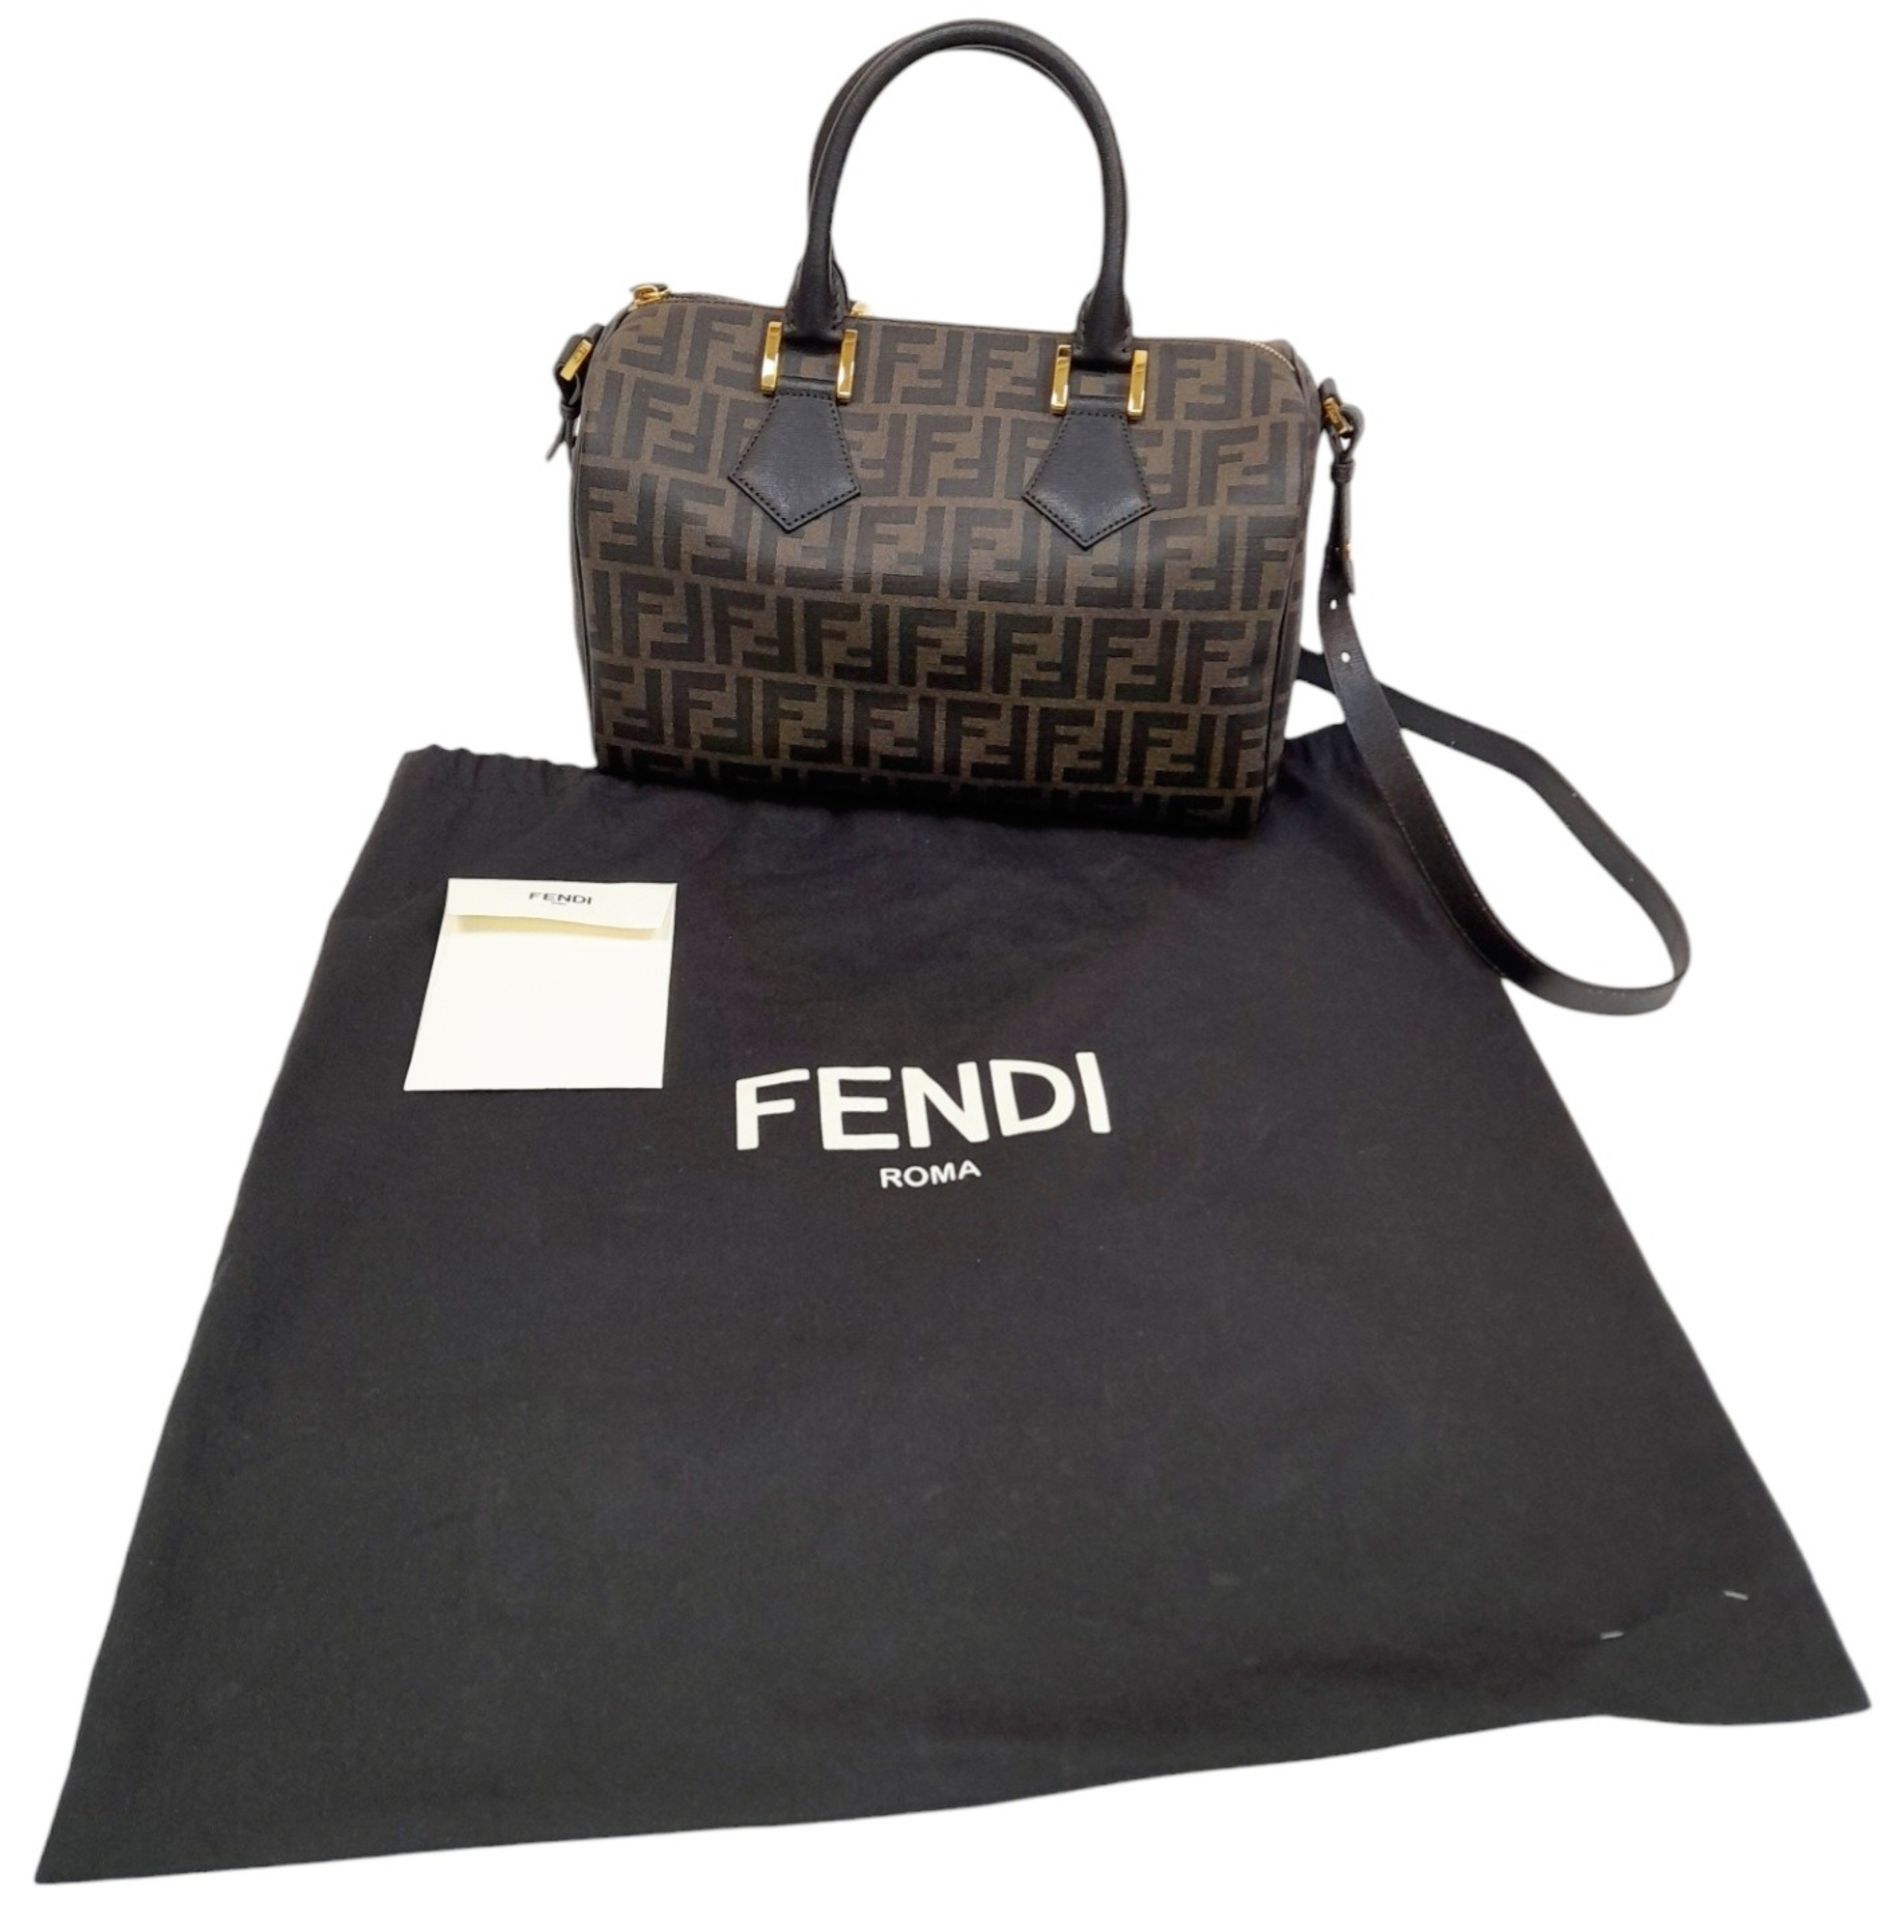 A Fendi Zucca Canvas Boston Bag. Canvas exterior, gold-tone hardware, adjustable strap, zipped top - Image 6 of 9